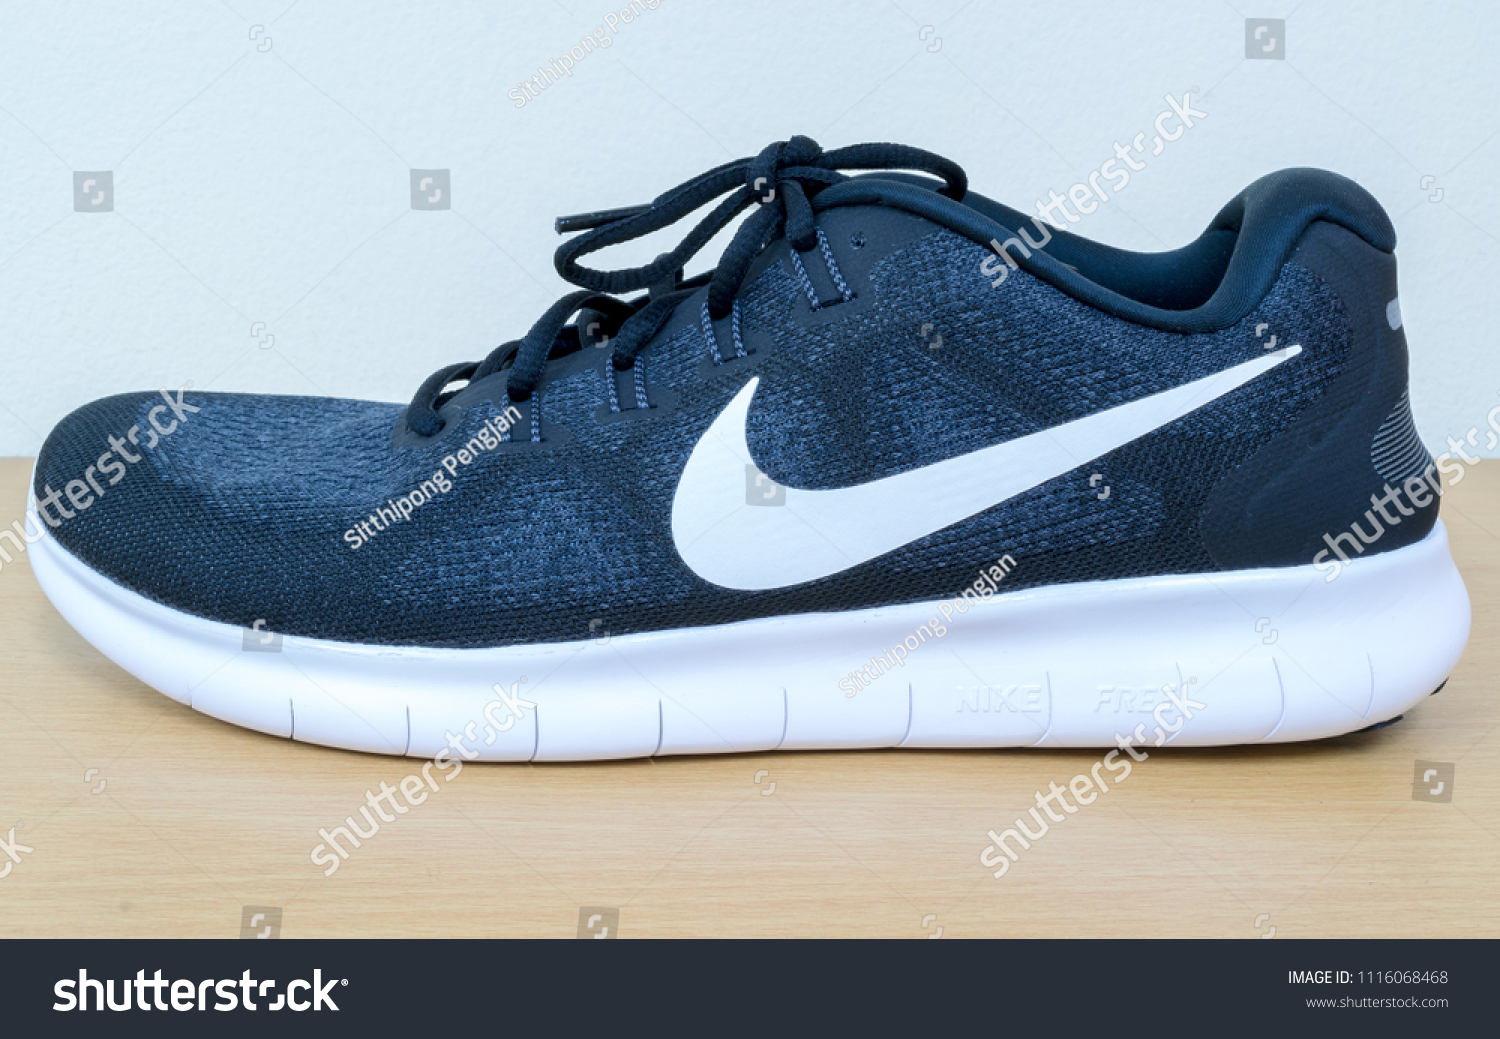 nike shoes for concrete floors